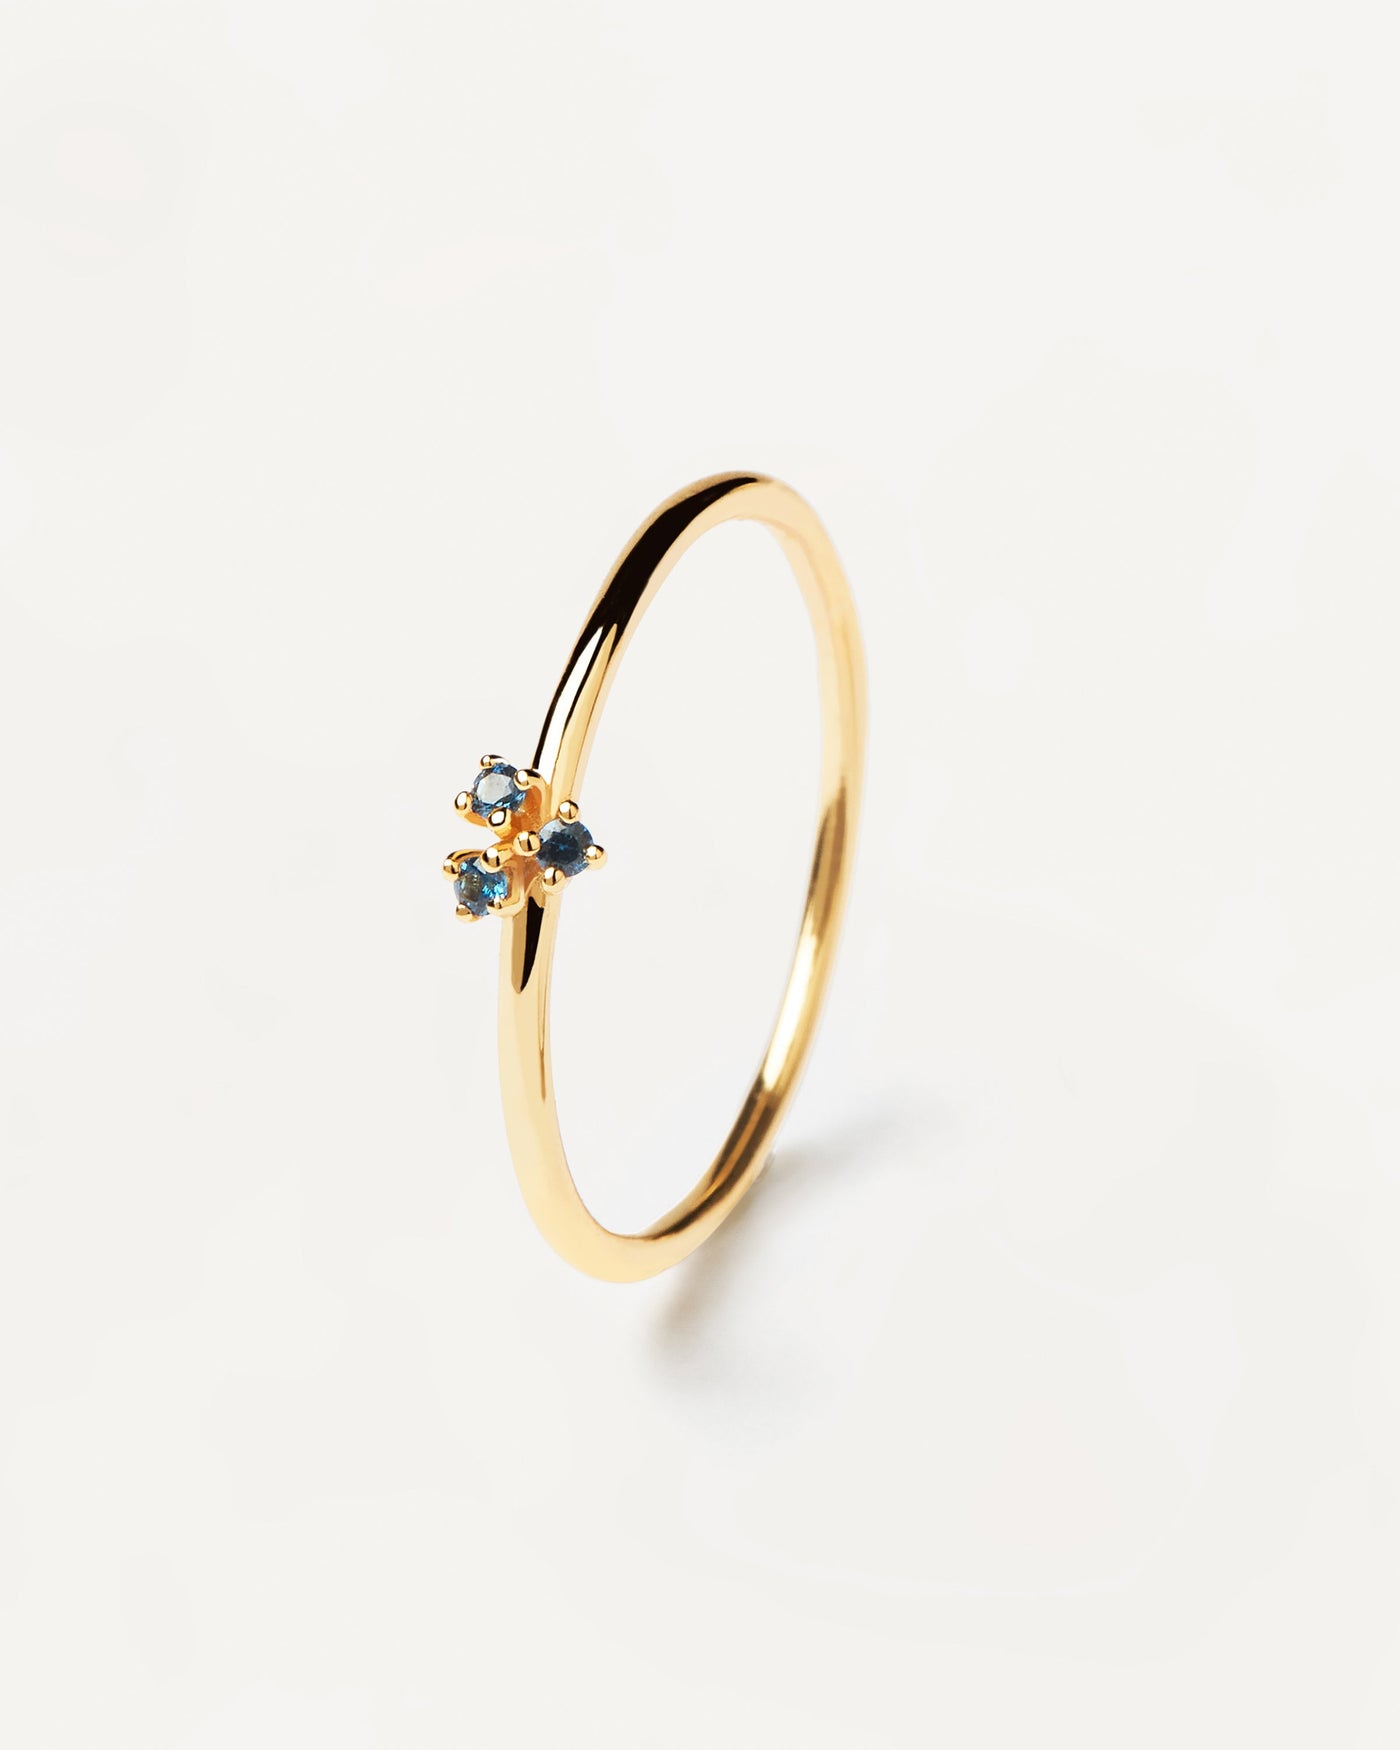 2023 Selection | Daisy Gold Ring. Get the latest arrival from PDPAOLA. Place your order safely and get this Best Seller. Free Shipping over 40€